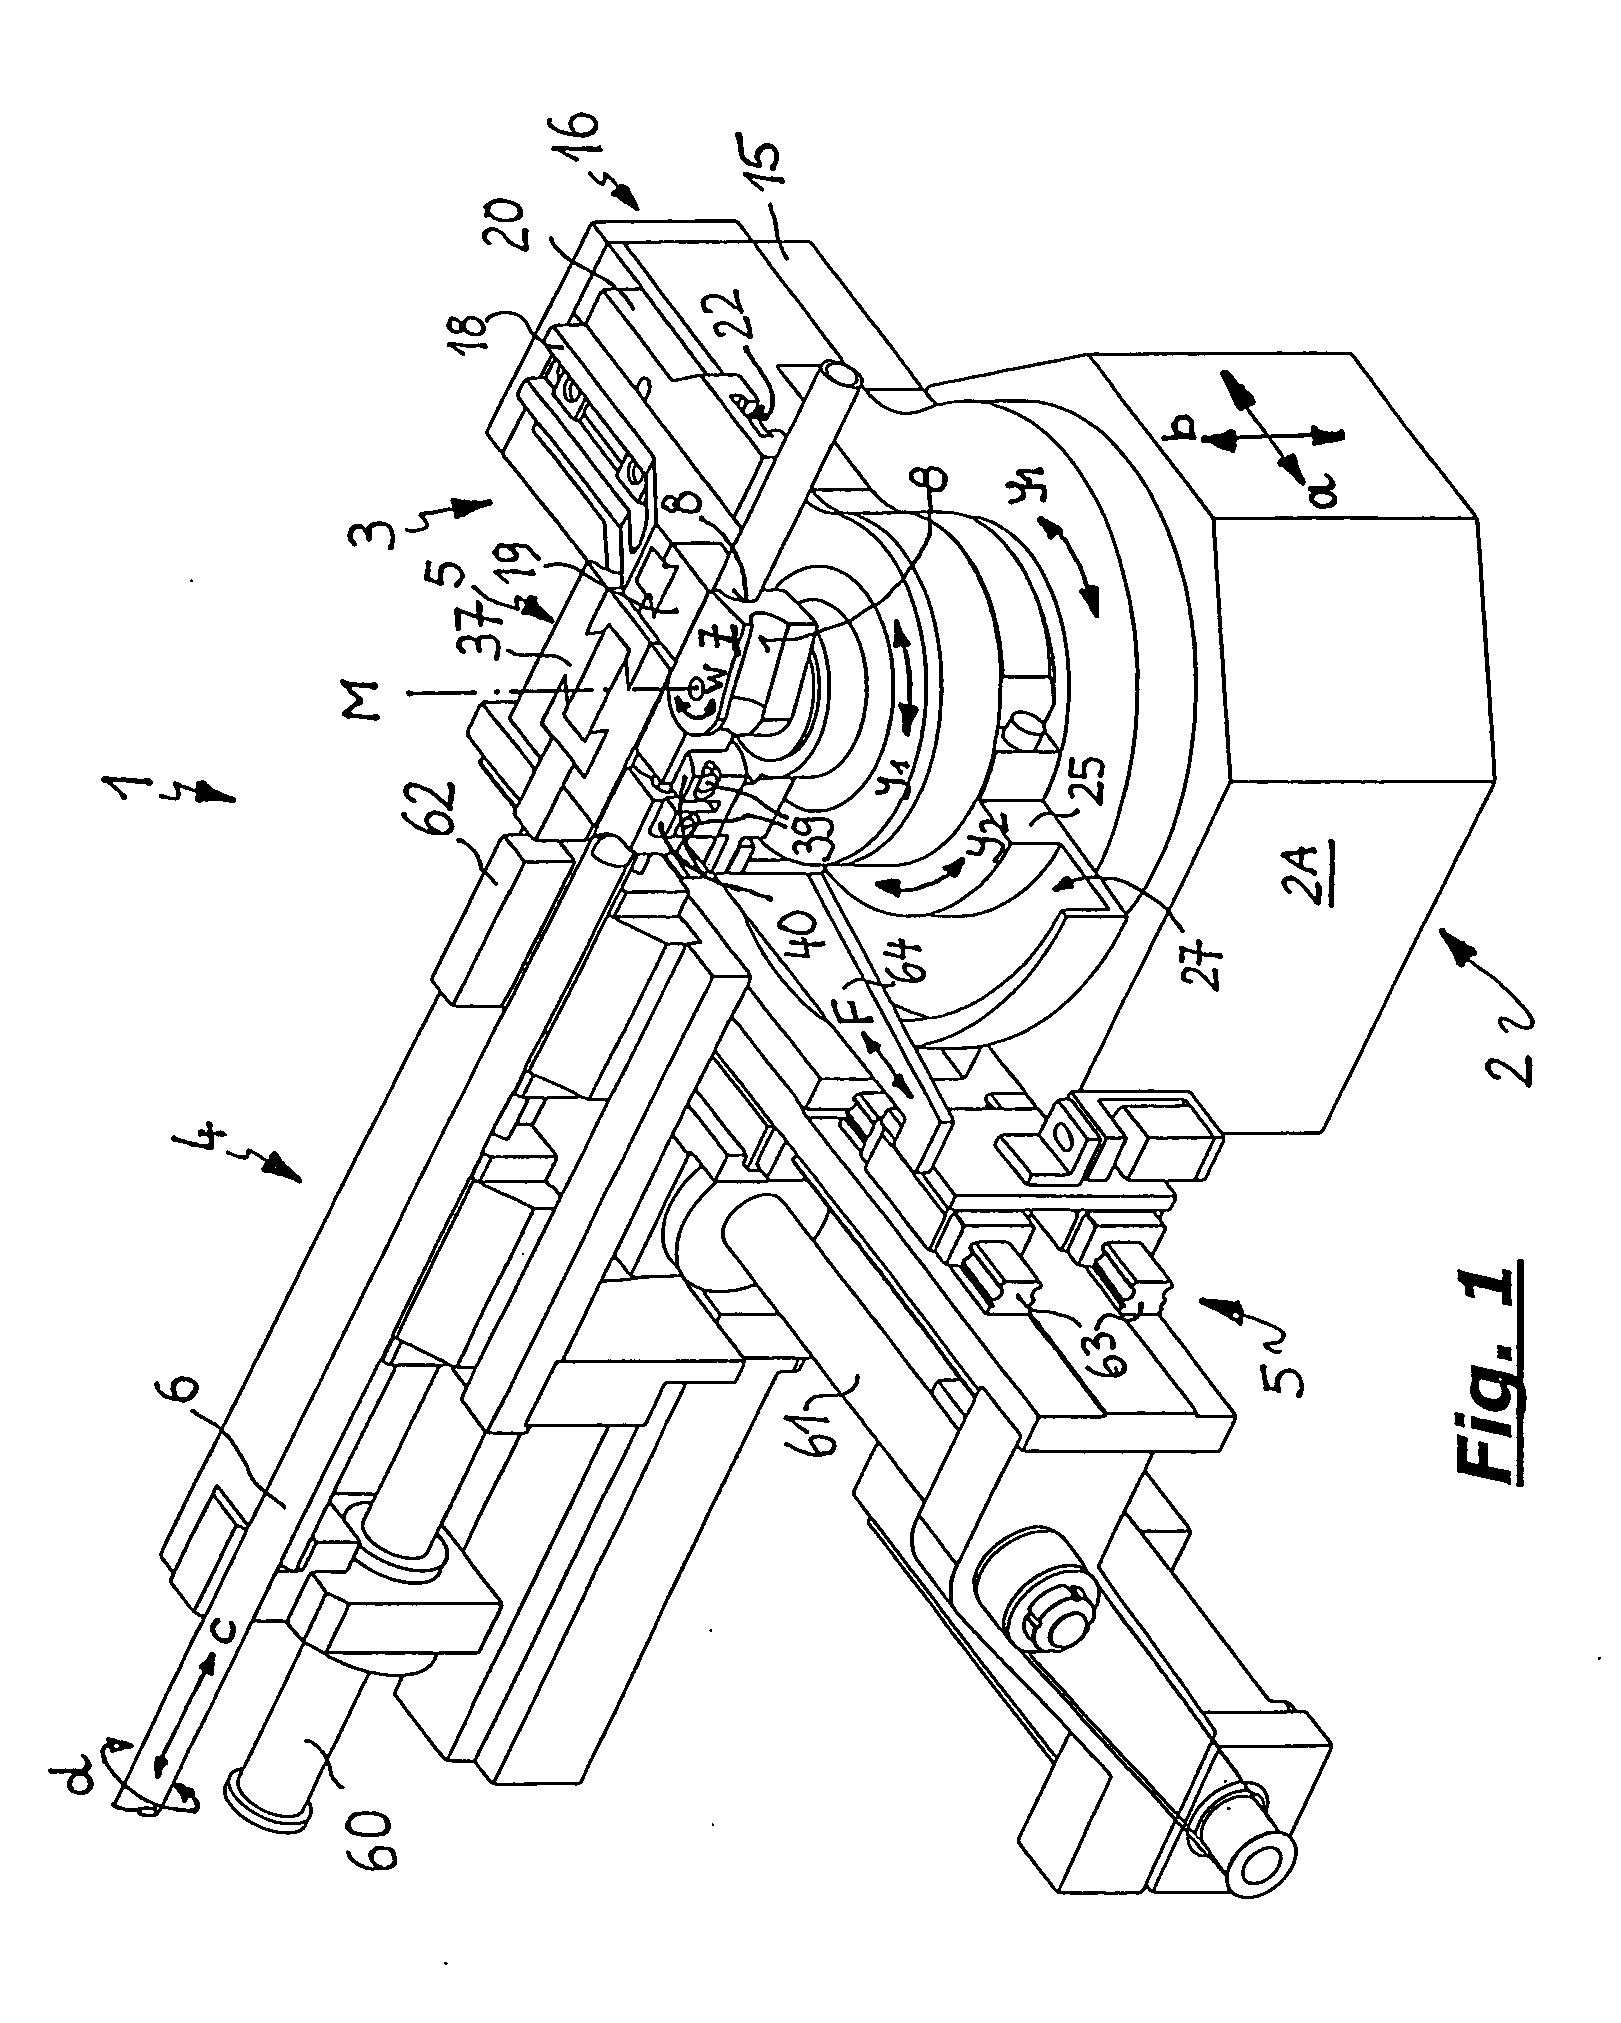 Machine for bending rod-shaped or tubular workpieces